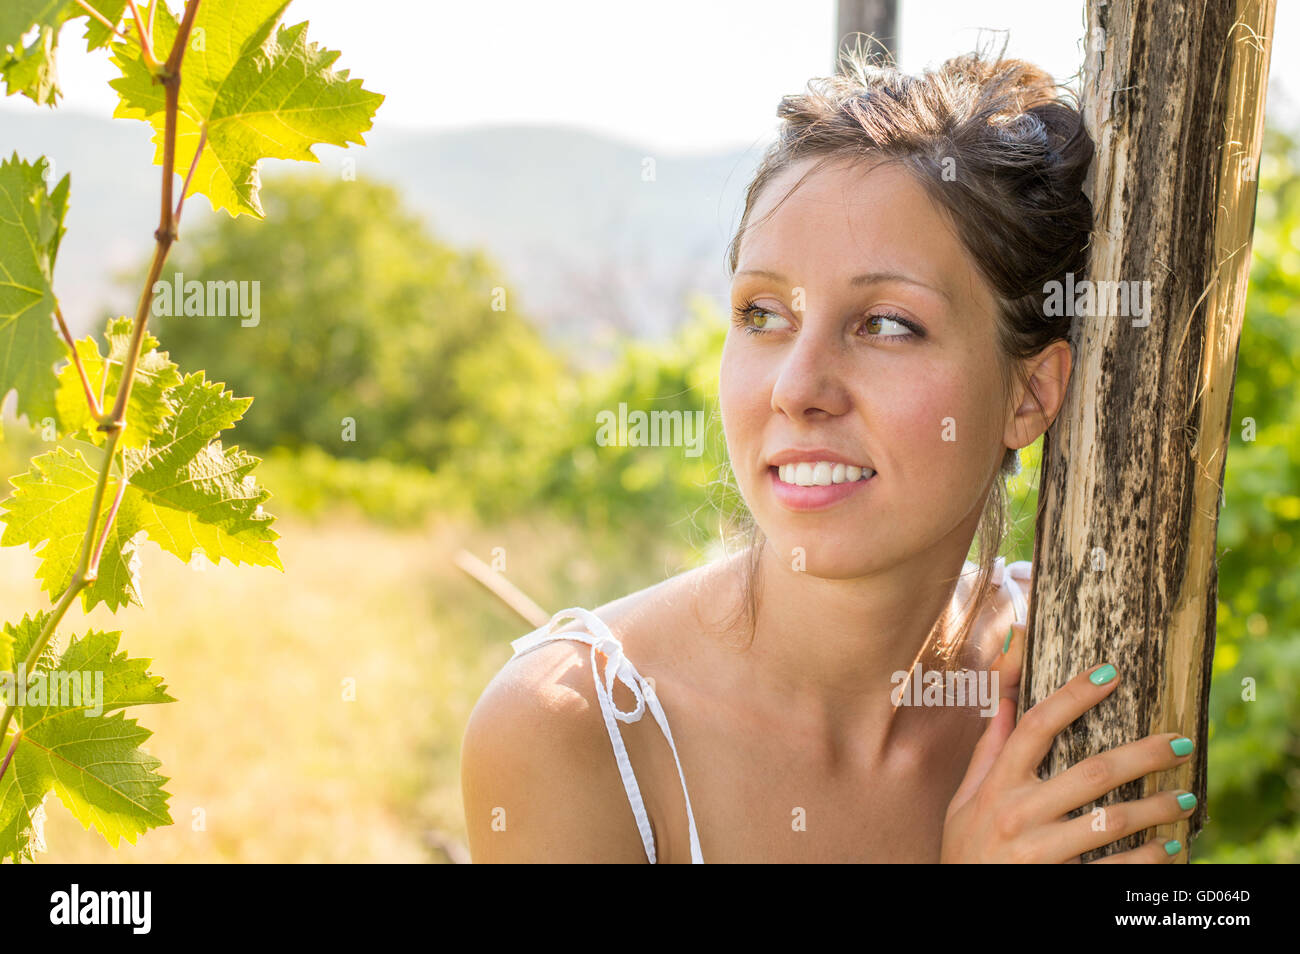 Young beautiful woman portrait in a vineyard Stock Photo